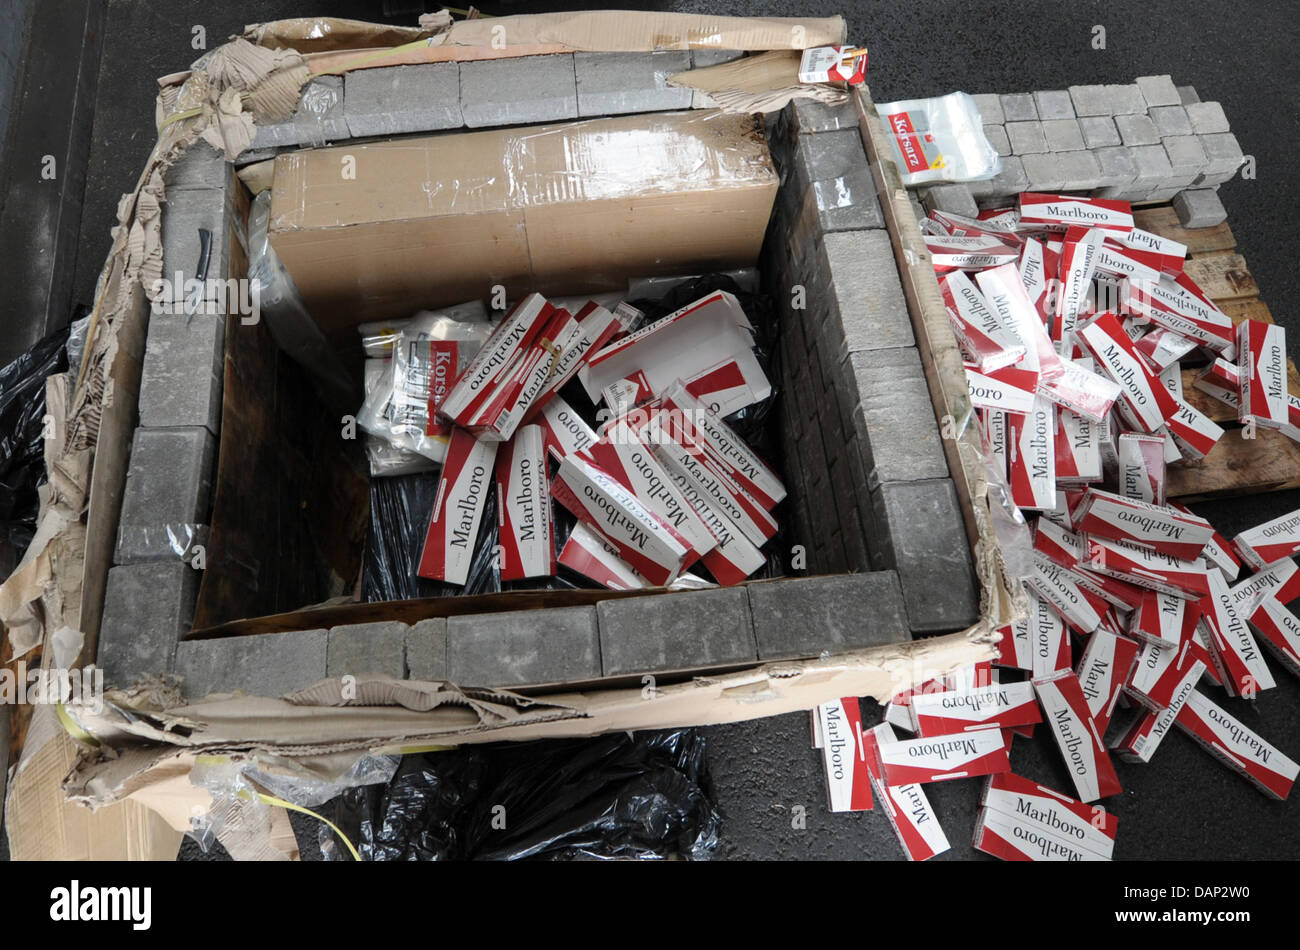 A load of fake Marlboro cigarettes is surrounded by paving stones at a warehouse in Hamburg, Germany, 21 July 2011. The customs investigation office seizured 13 million cigerettes. Christian Charisius Stock Photo